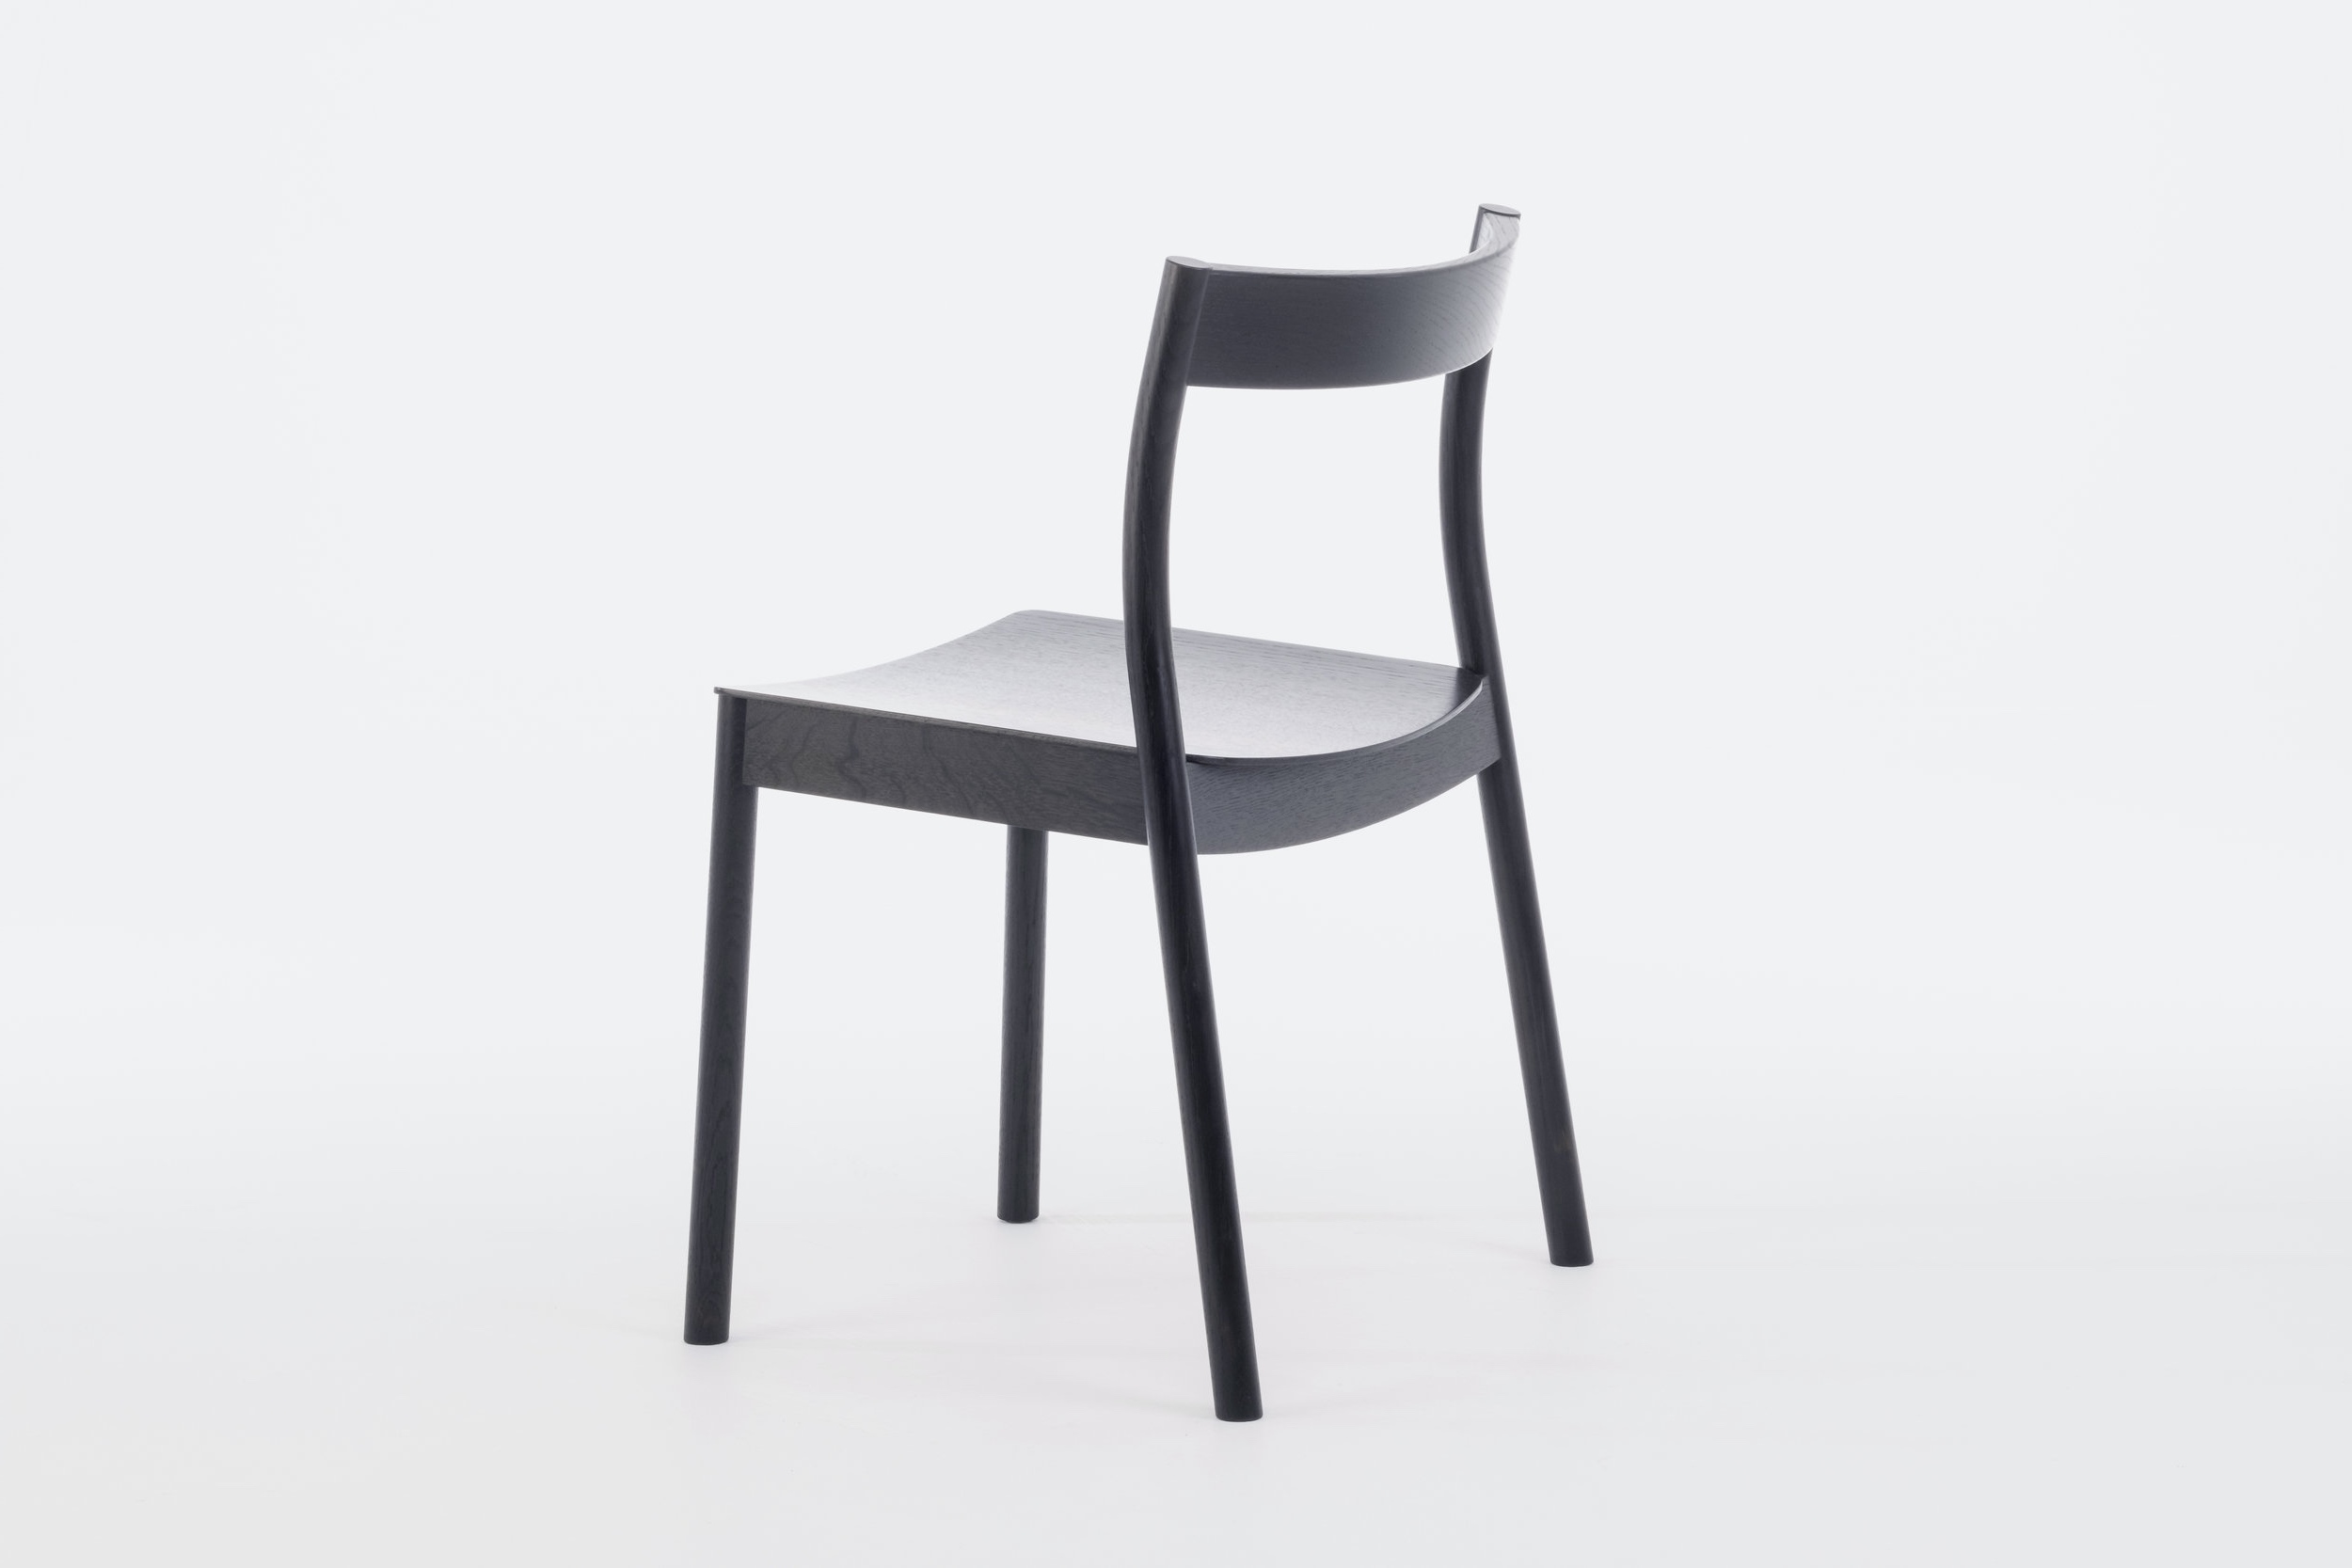 Alma Stacking Chair with Upholstered seat pad